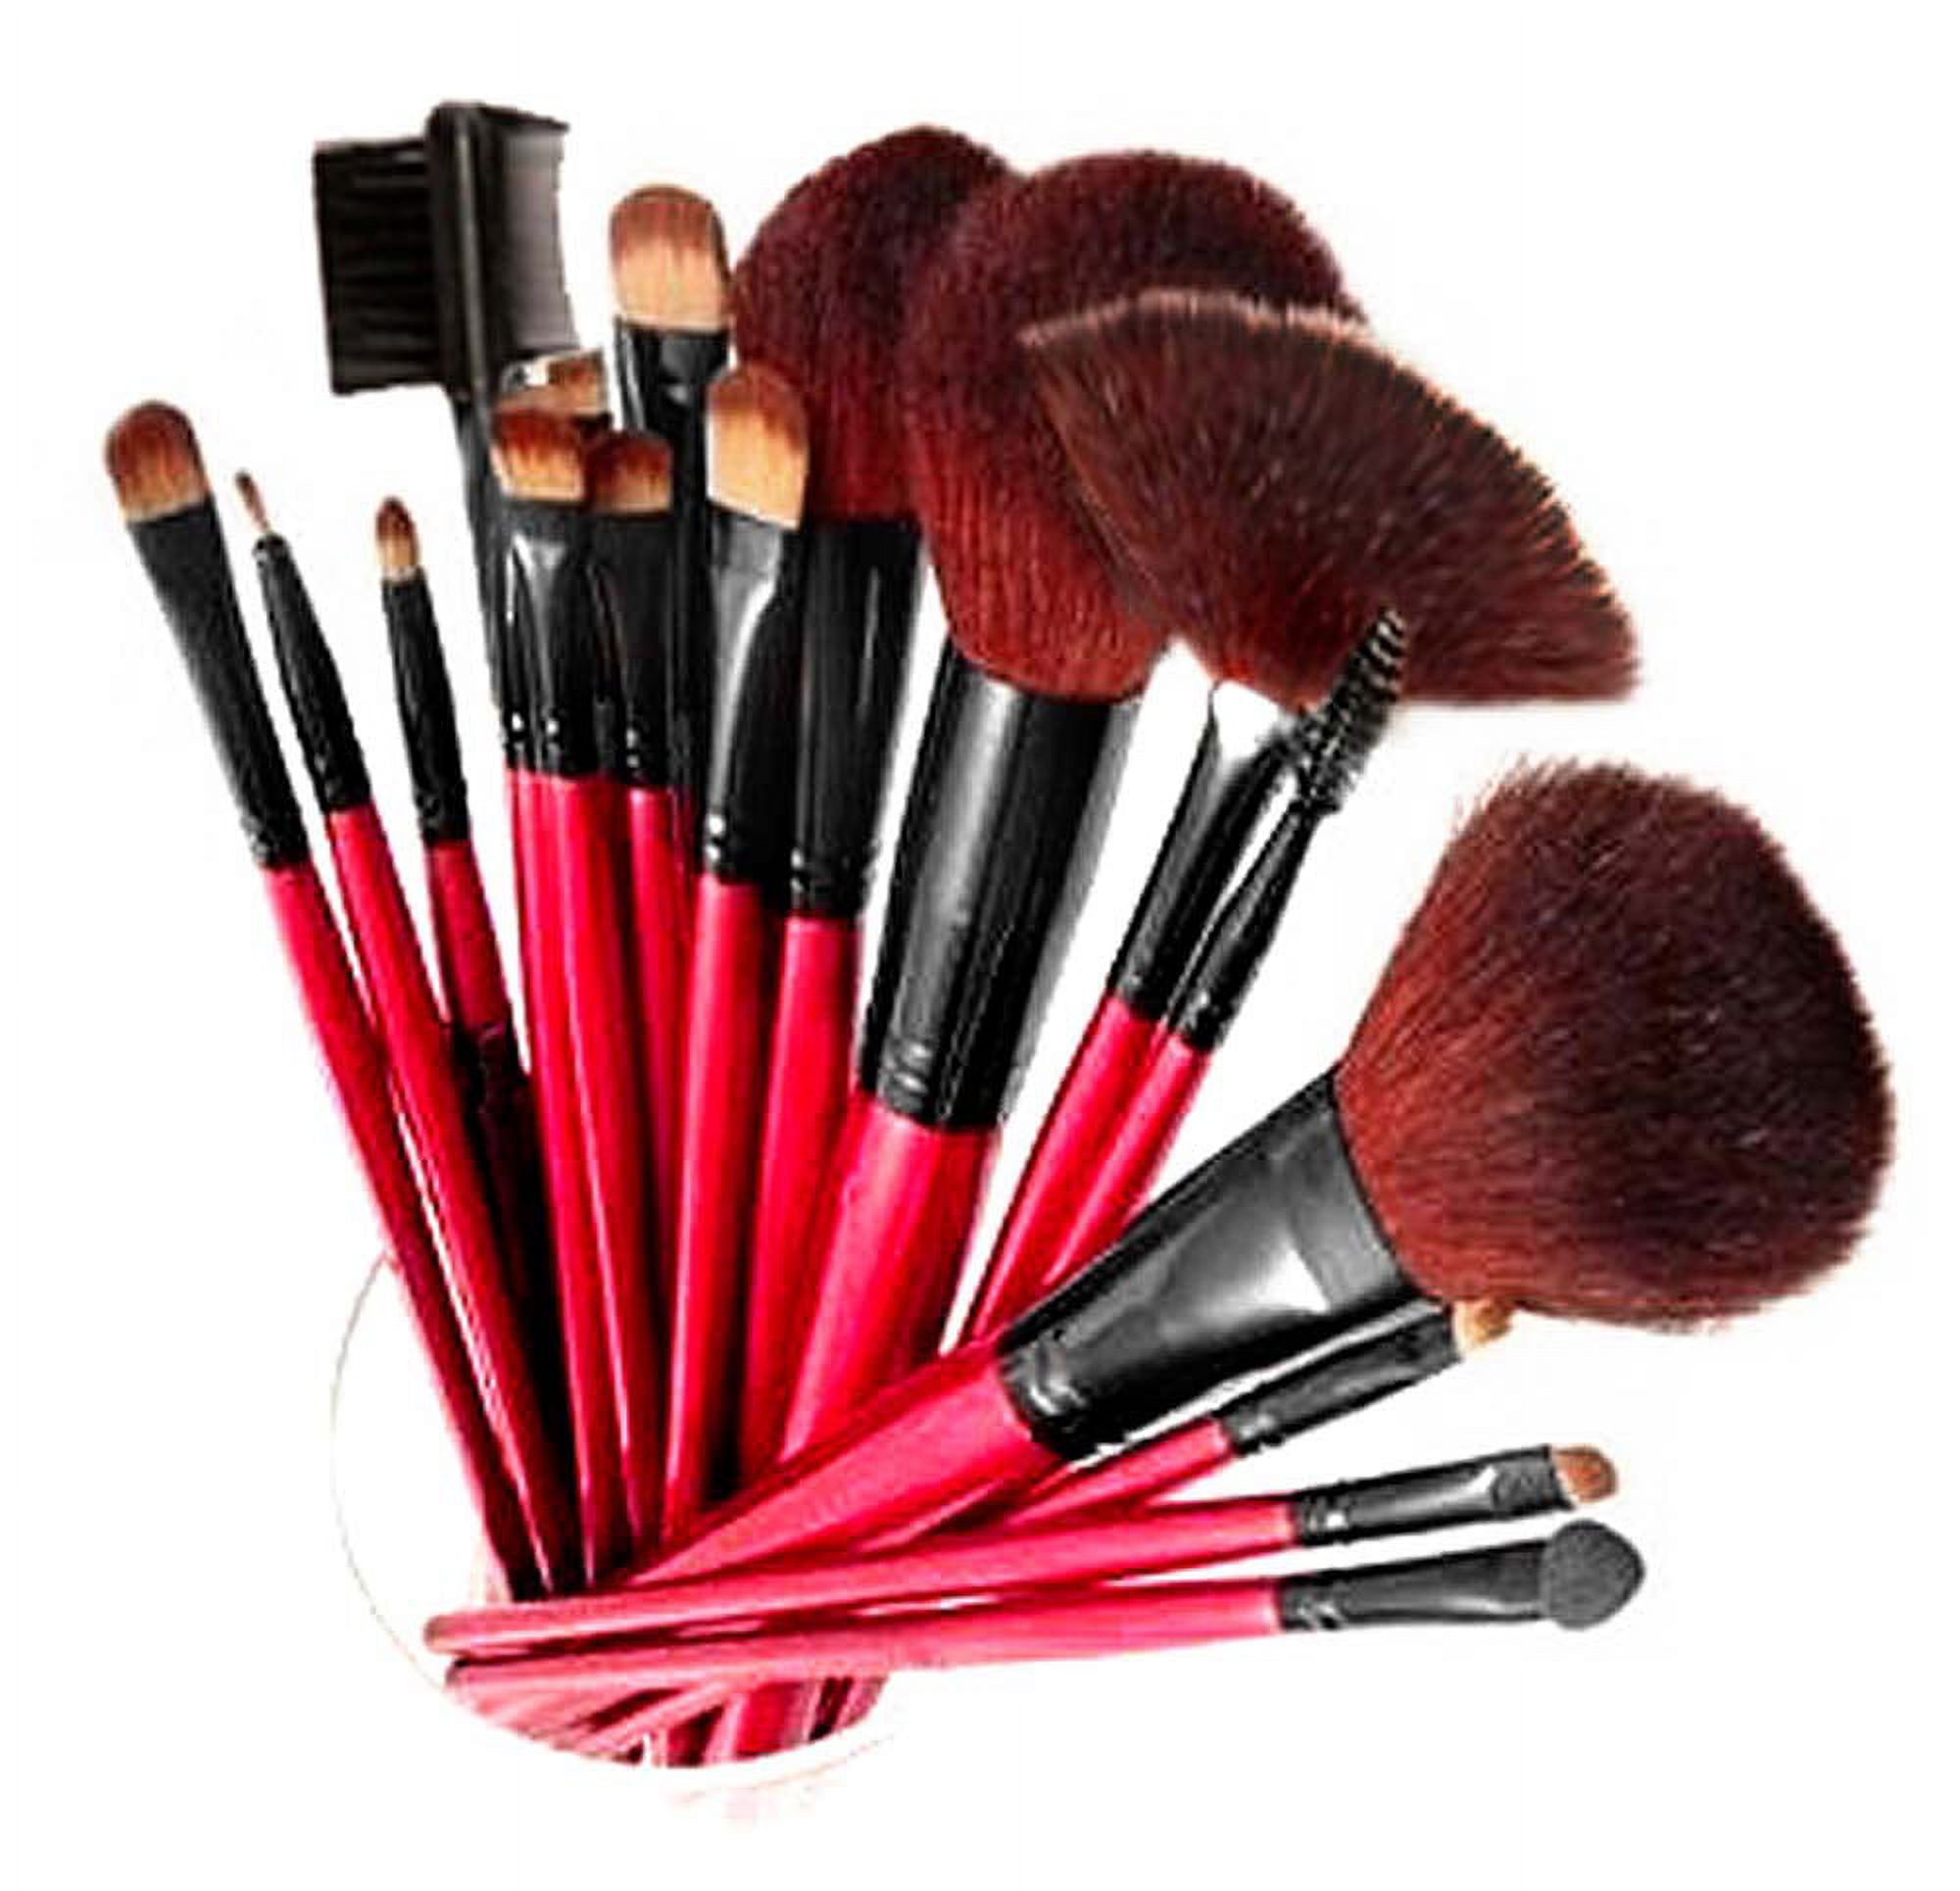 SHANY Professional 12 - Piece Cosmetic Brush Set with Pouch - RED - image 1 of 2